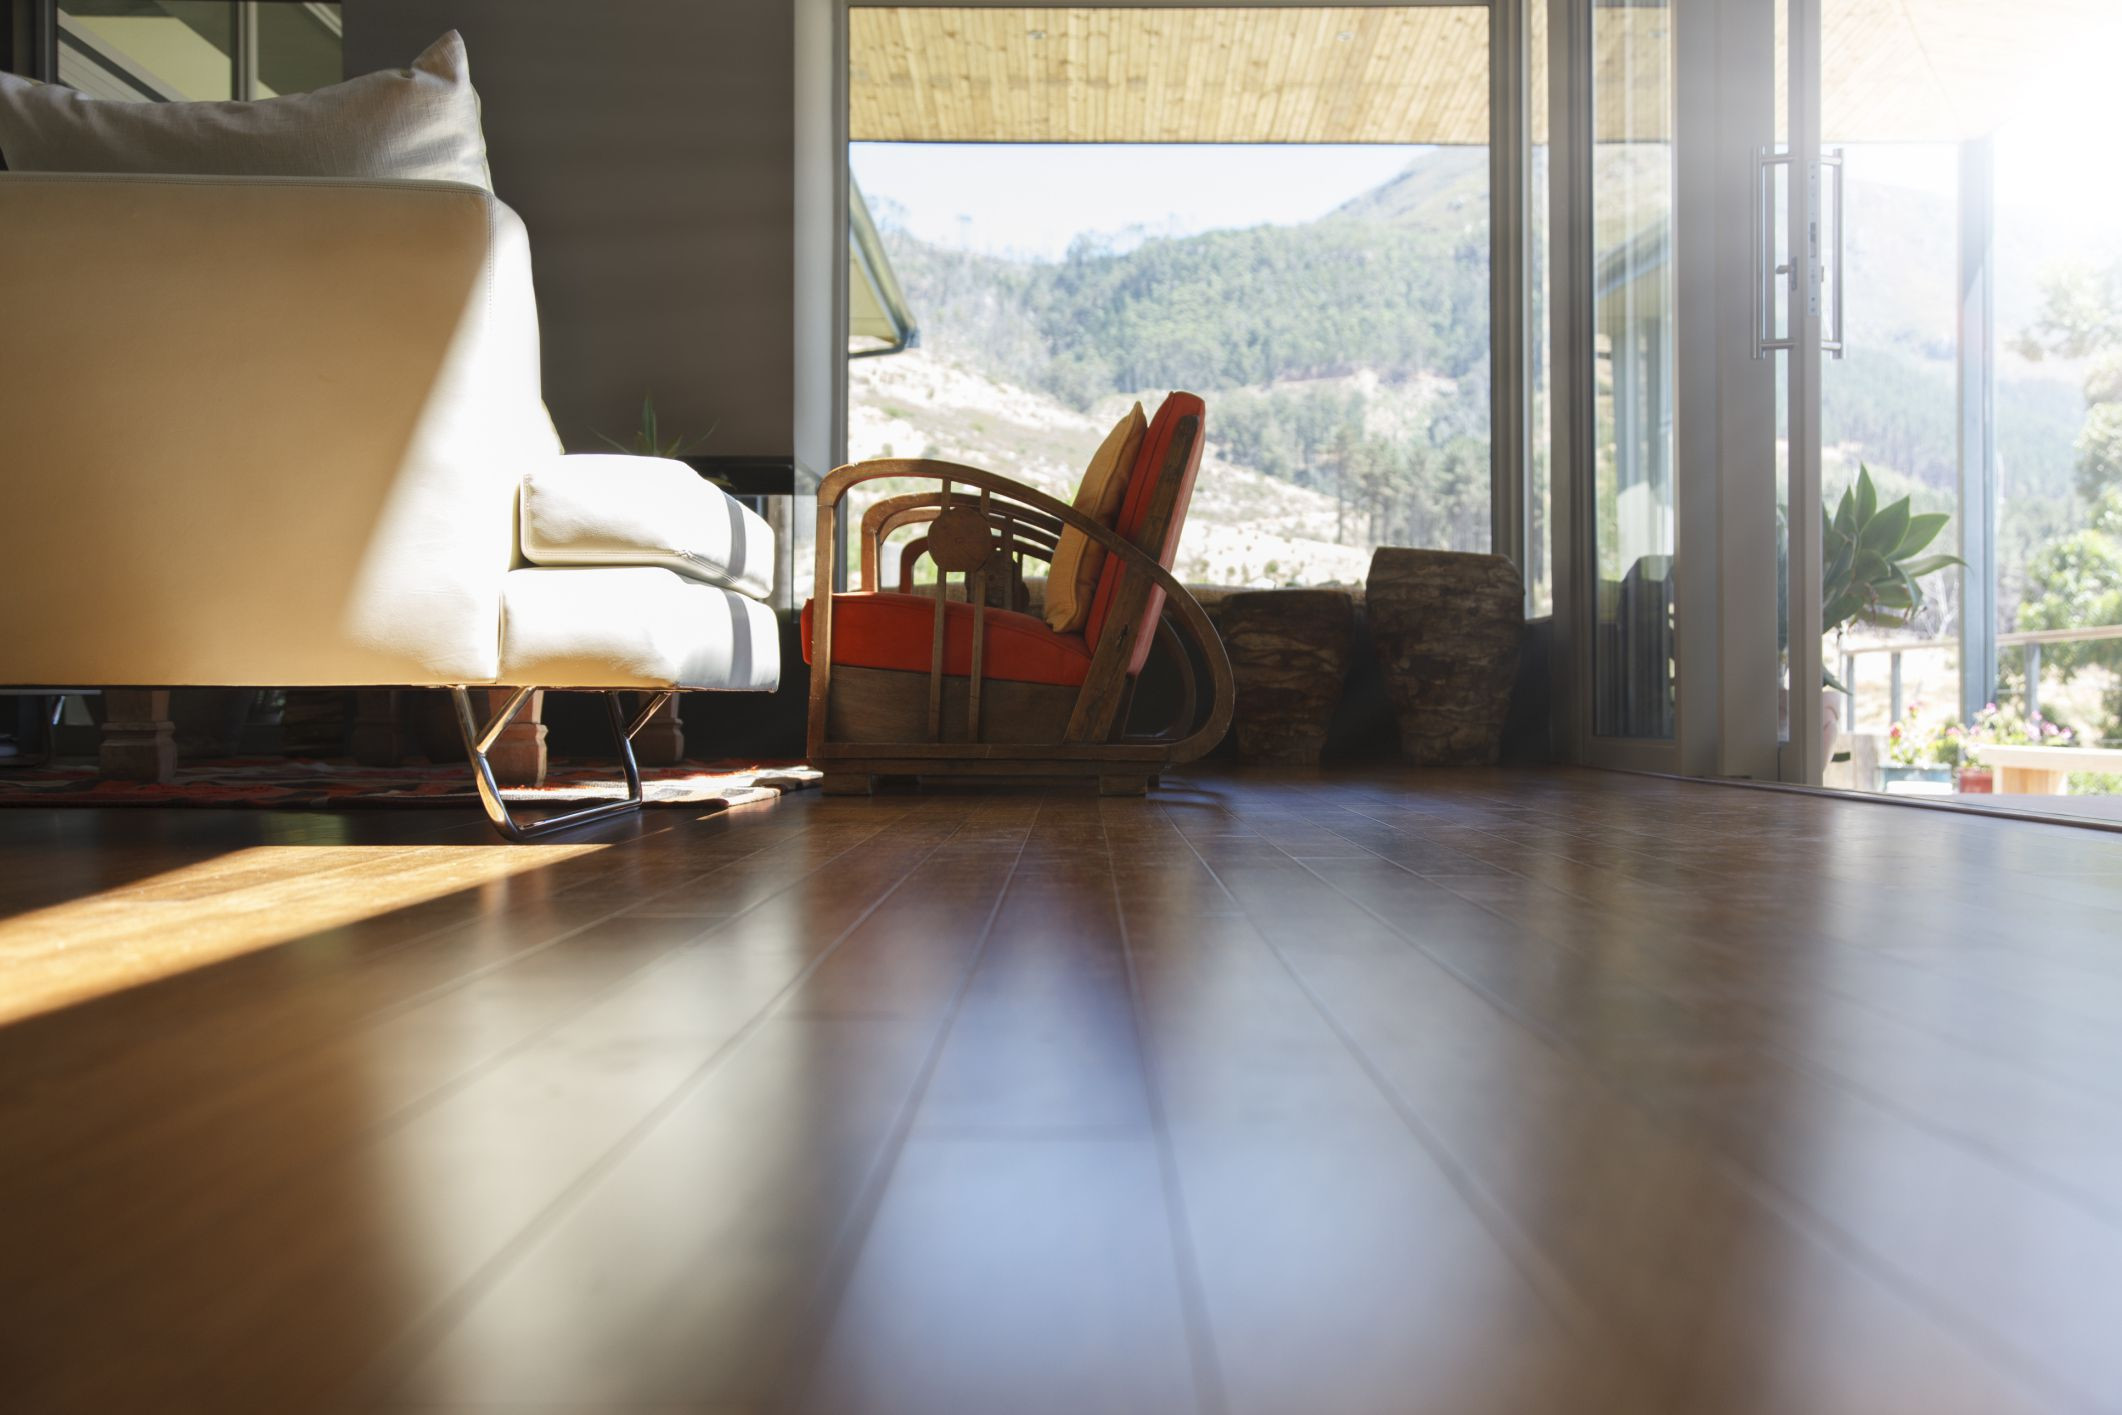 20 Fashionable Putting Hardwood Floors On Concrete 2024 free download putting hardwood floors on concrete of floating floors basics types and pros and cons in exotic hardwood flooring 525439899 56a49d3a3df78cf77283453d